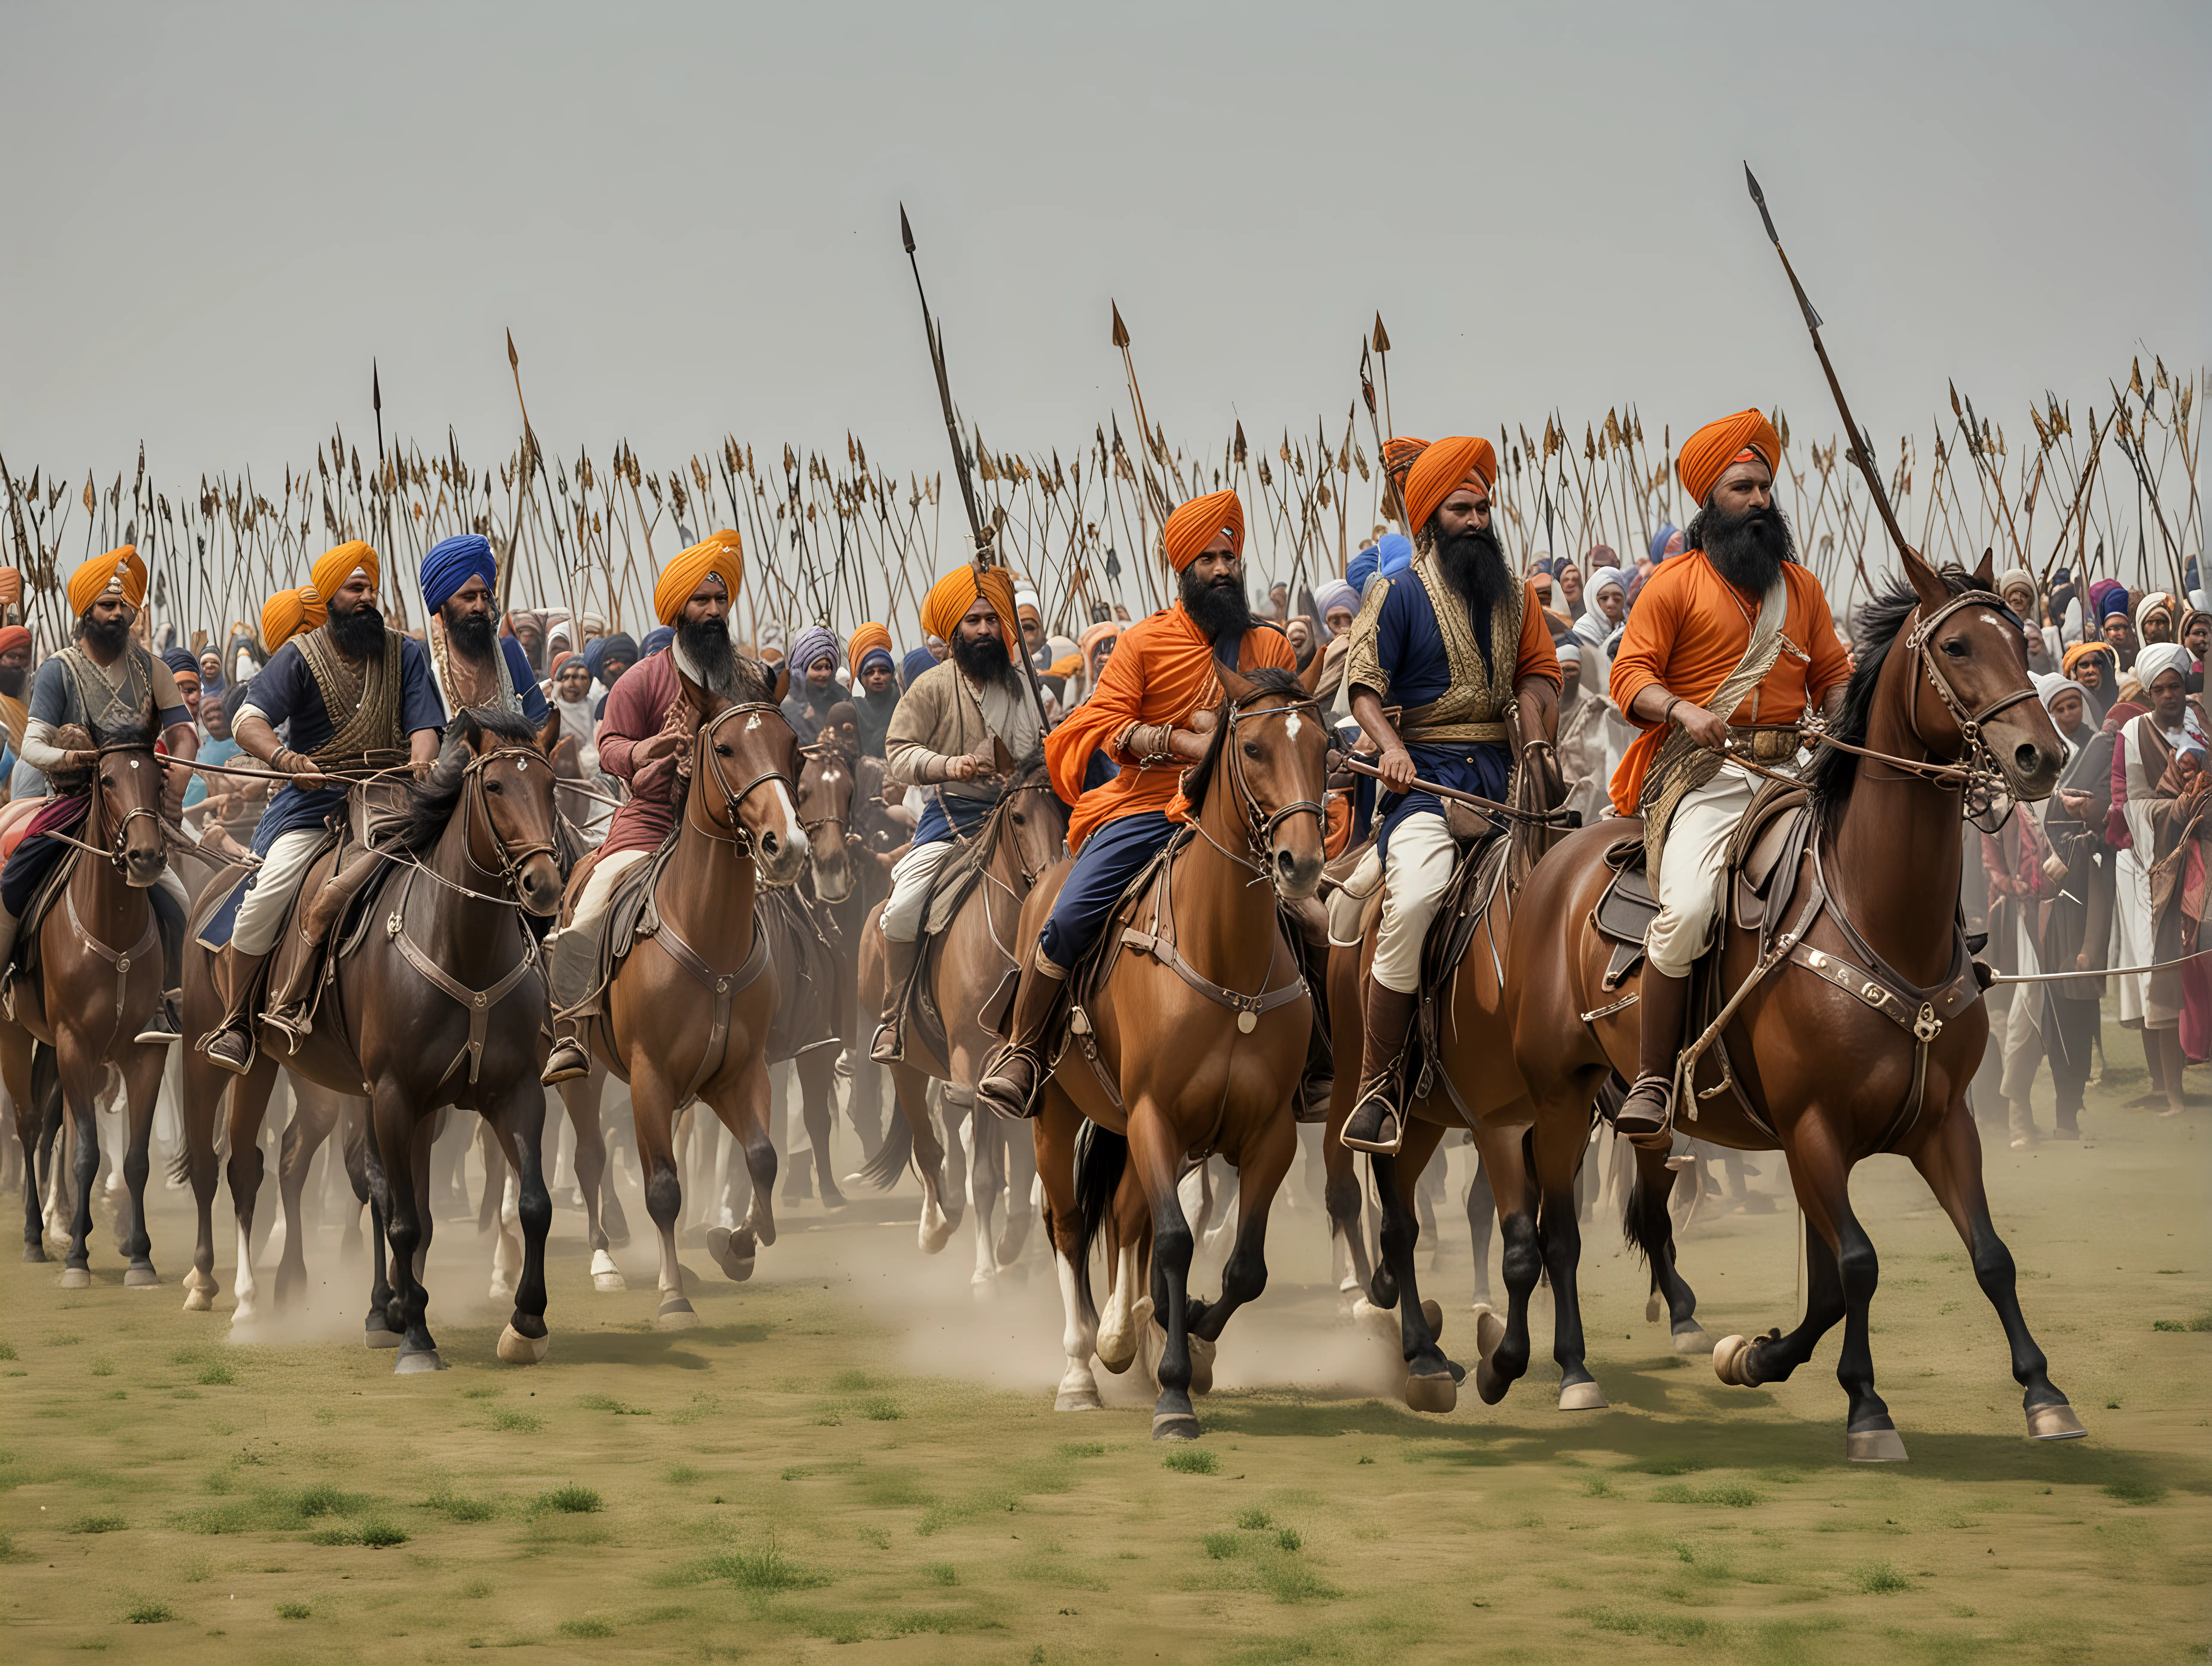 Sikh Warriors Riding Horses Armed with Swords and Arrows